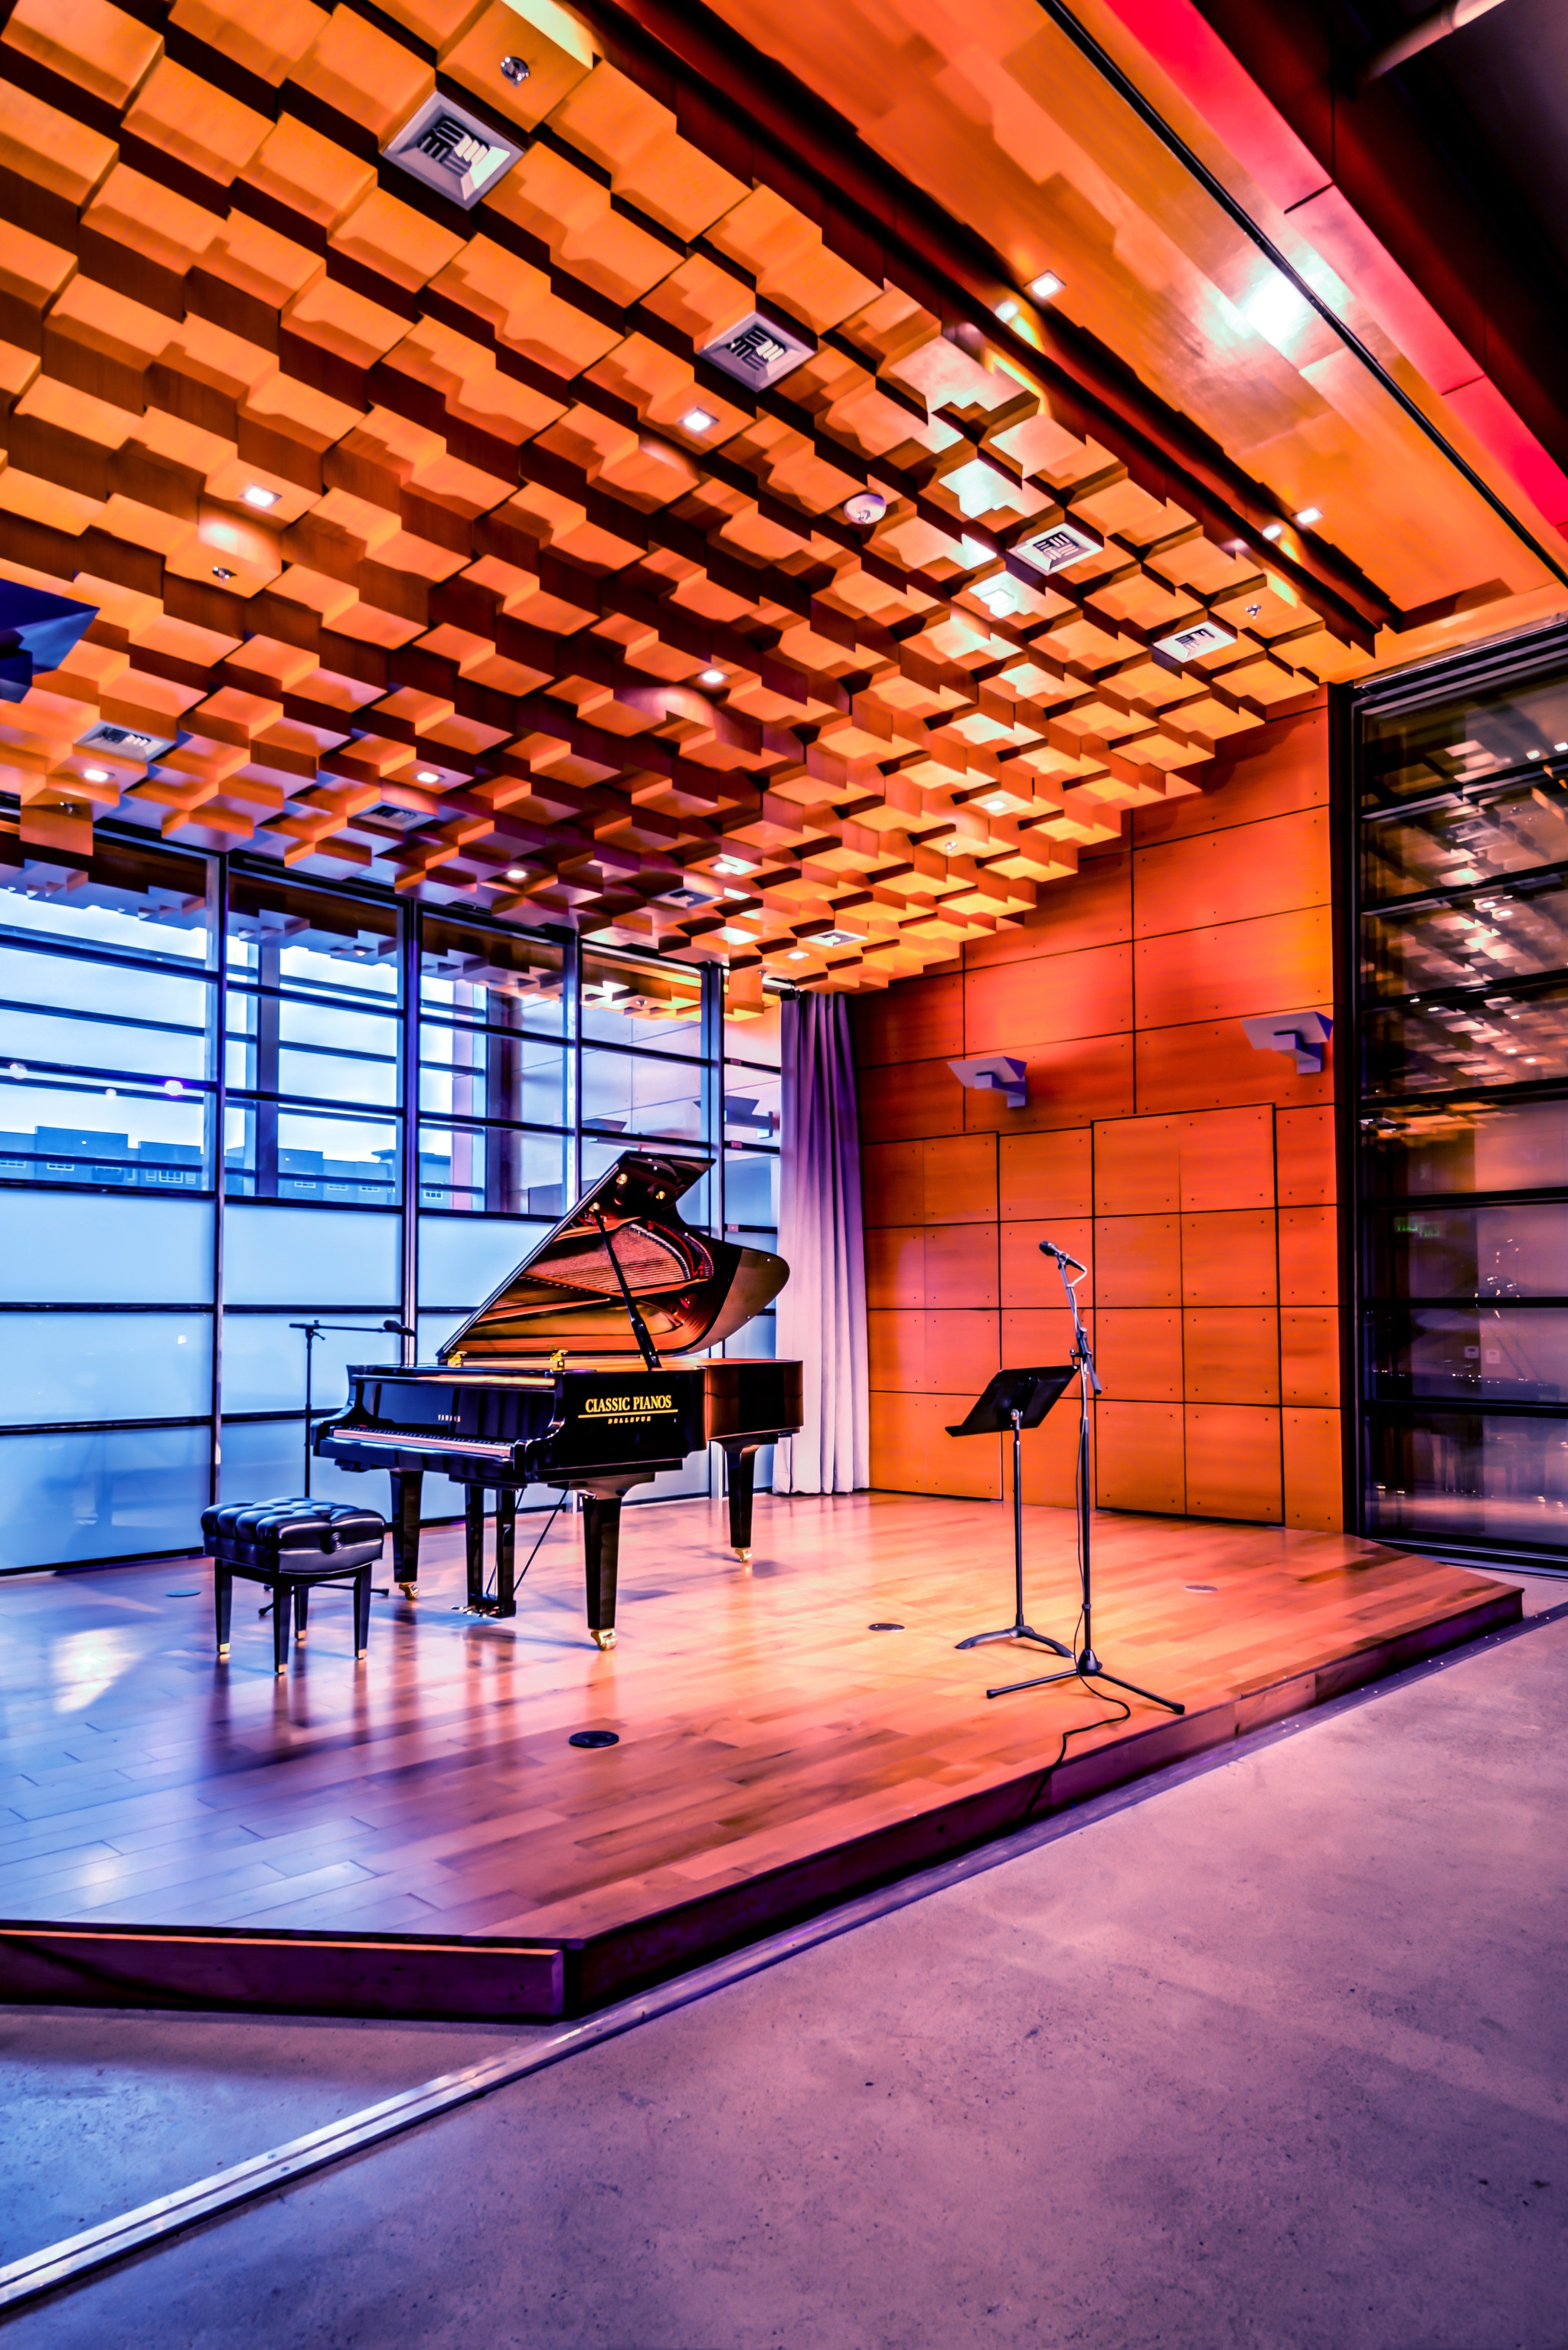 The interior of Resonance at SOMA Towers is designed for classical musicians to practice and perform to either a theater or table-top setting. Windows open to the street to allow passersbys to hear the music.